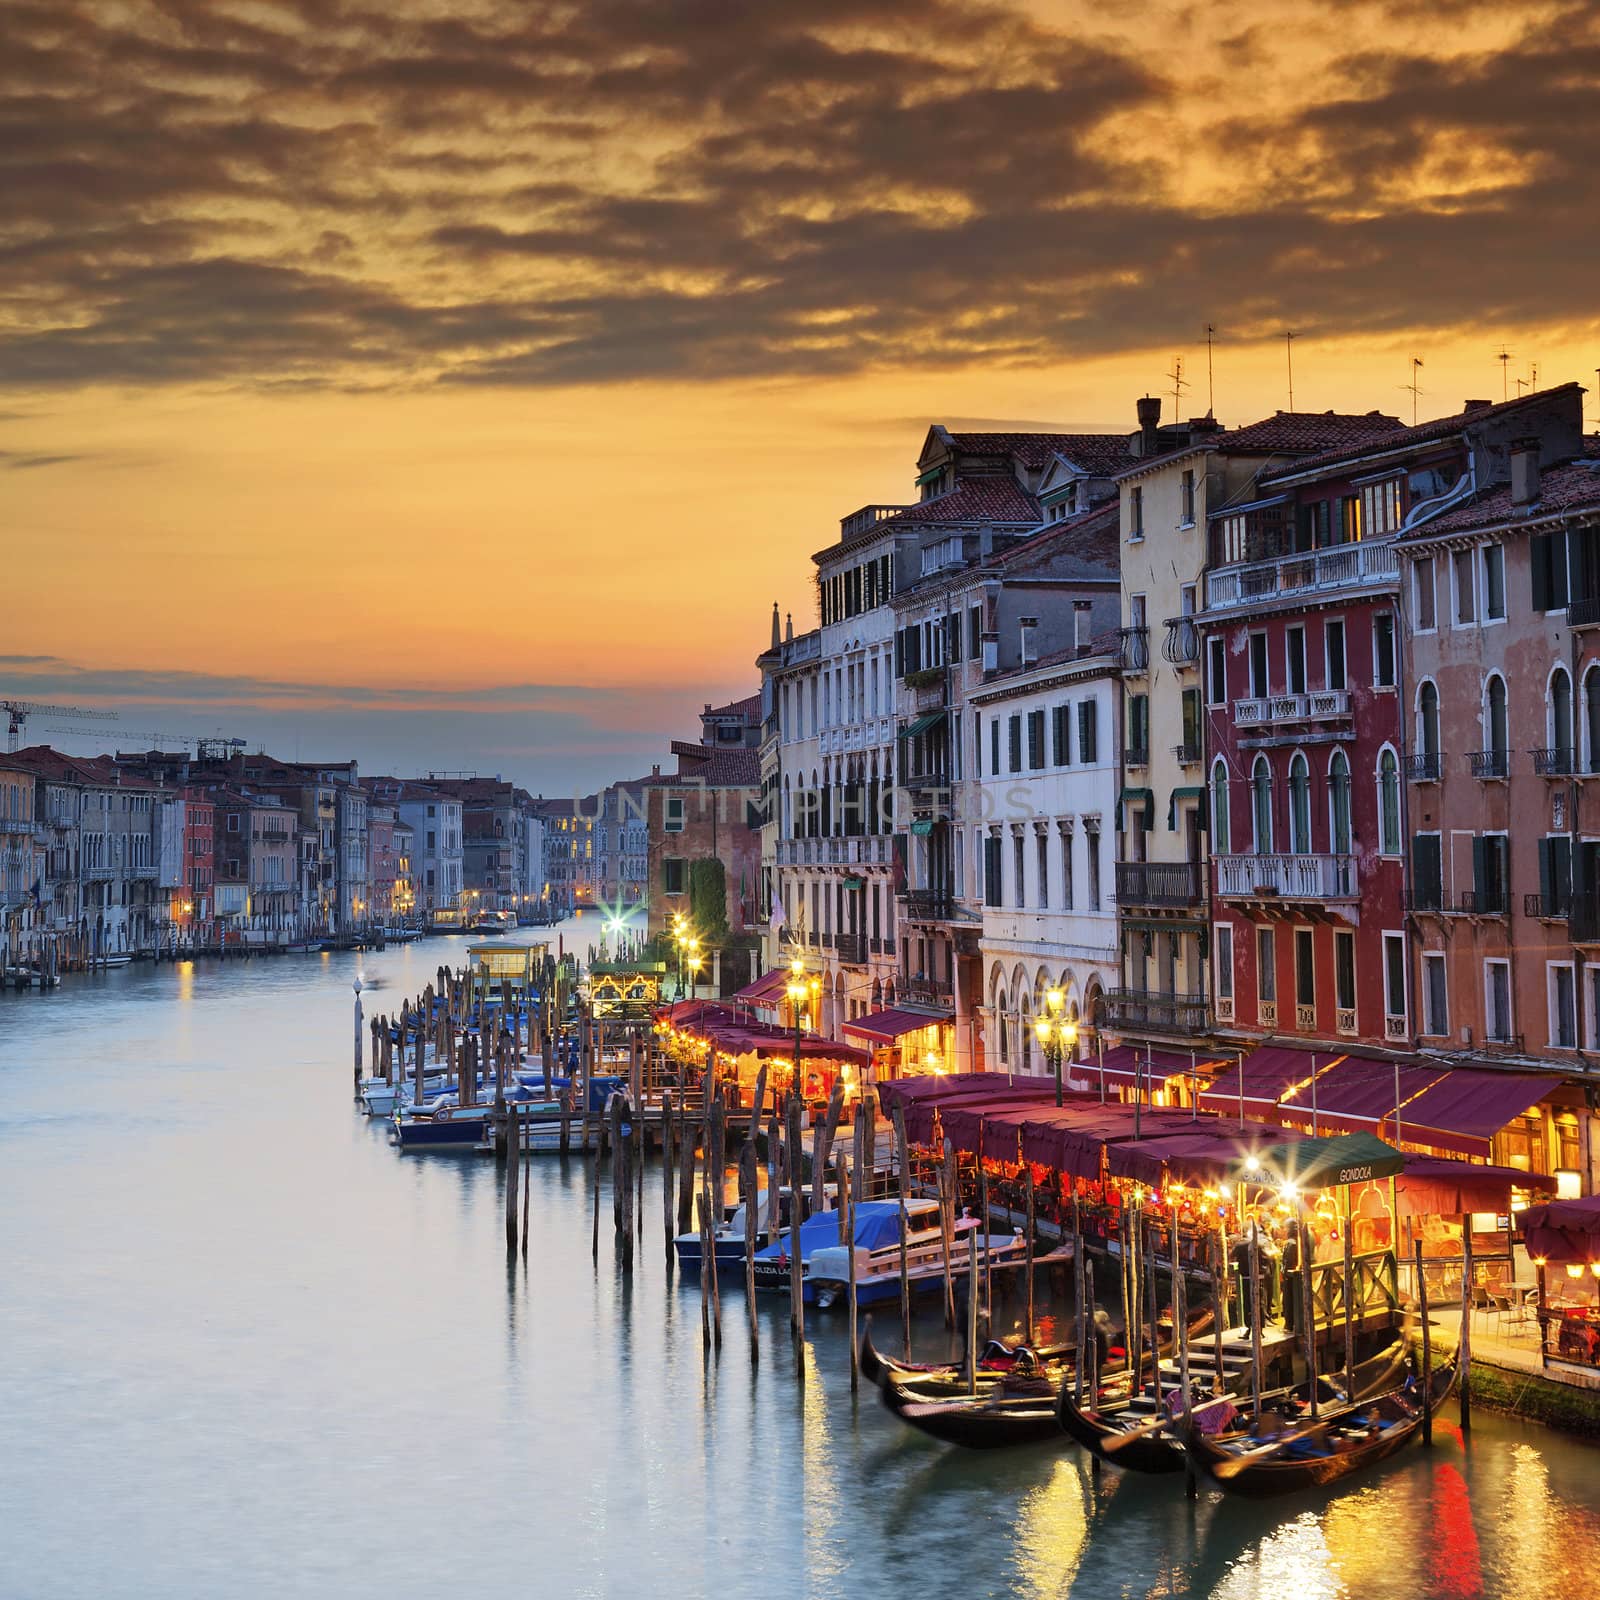 Famous Grand Canal at sunset by vwalakte